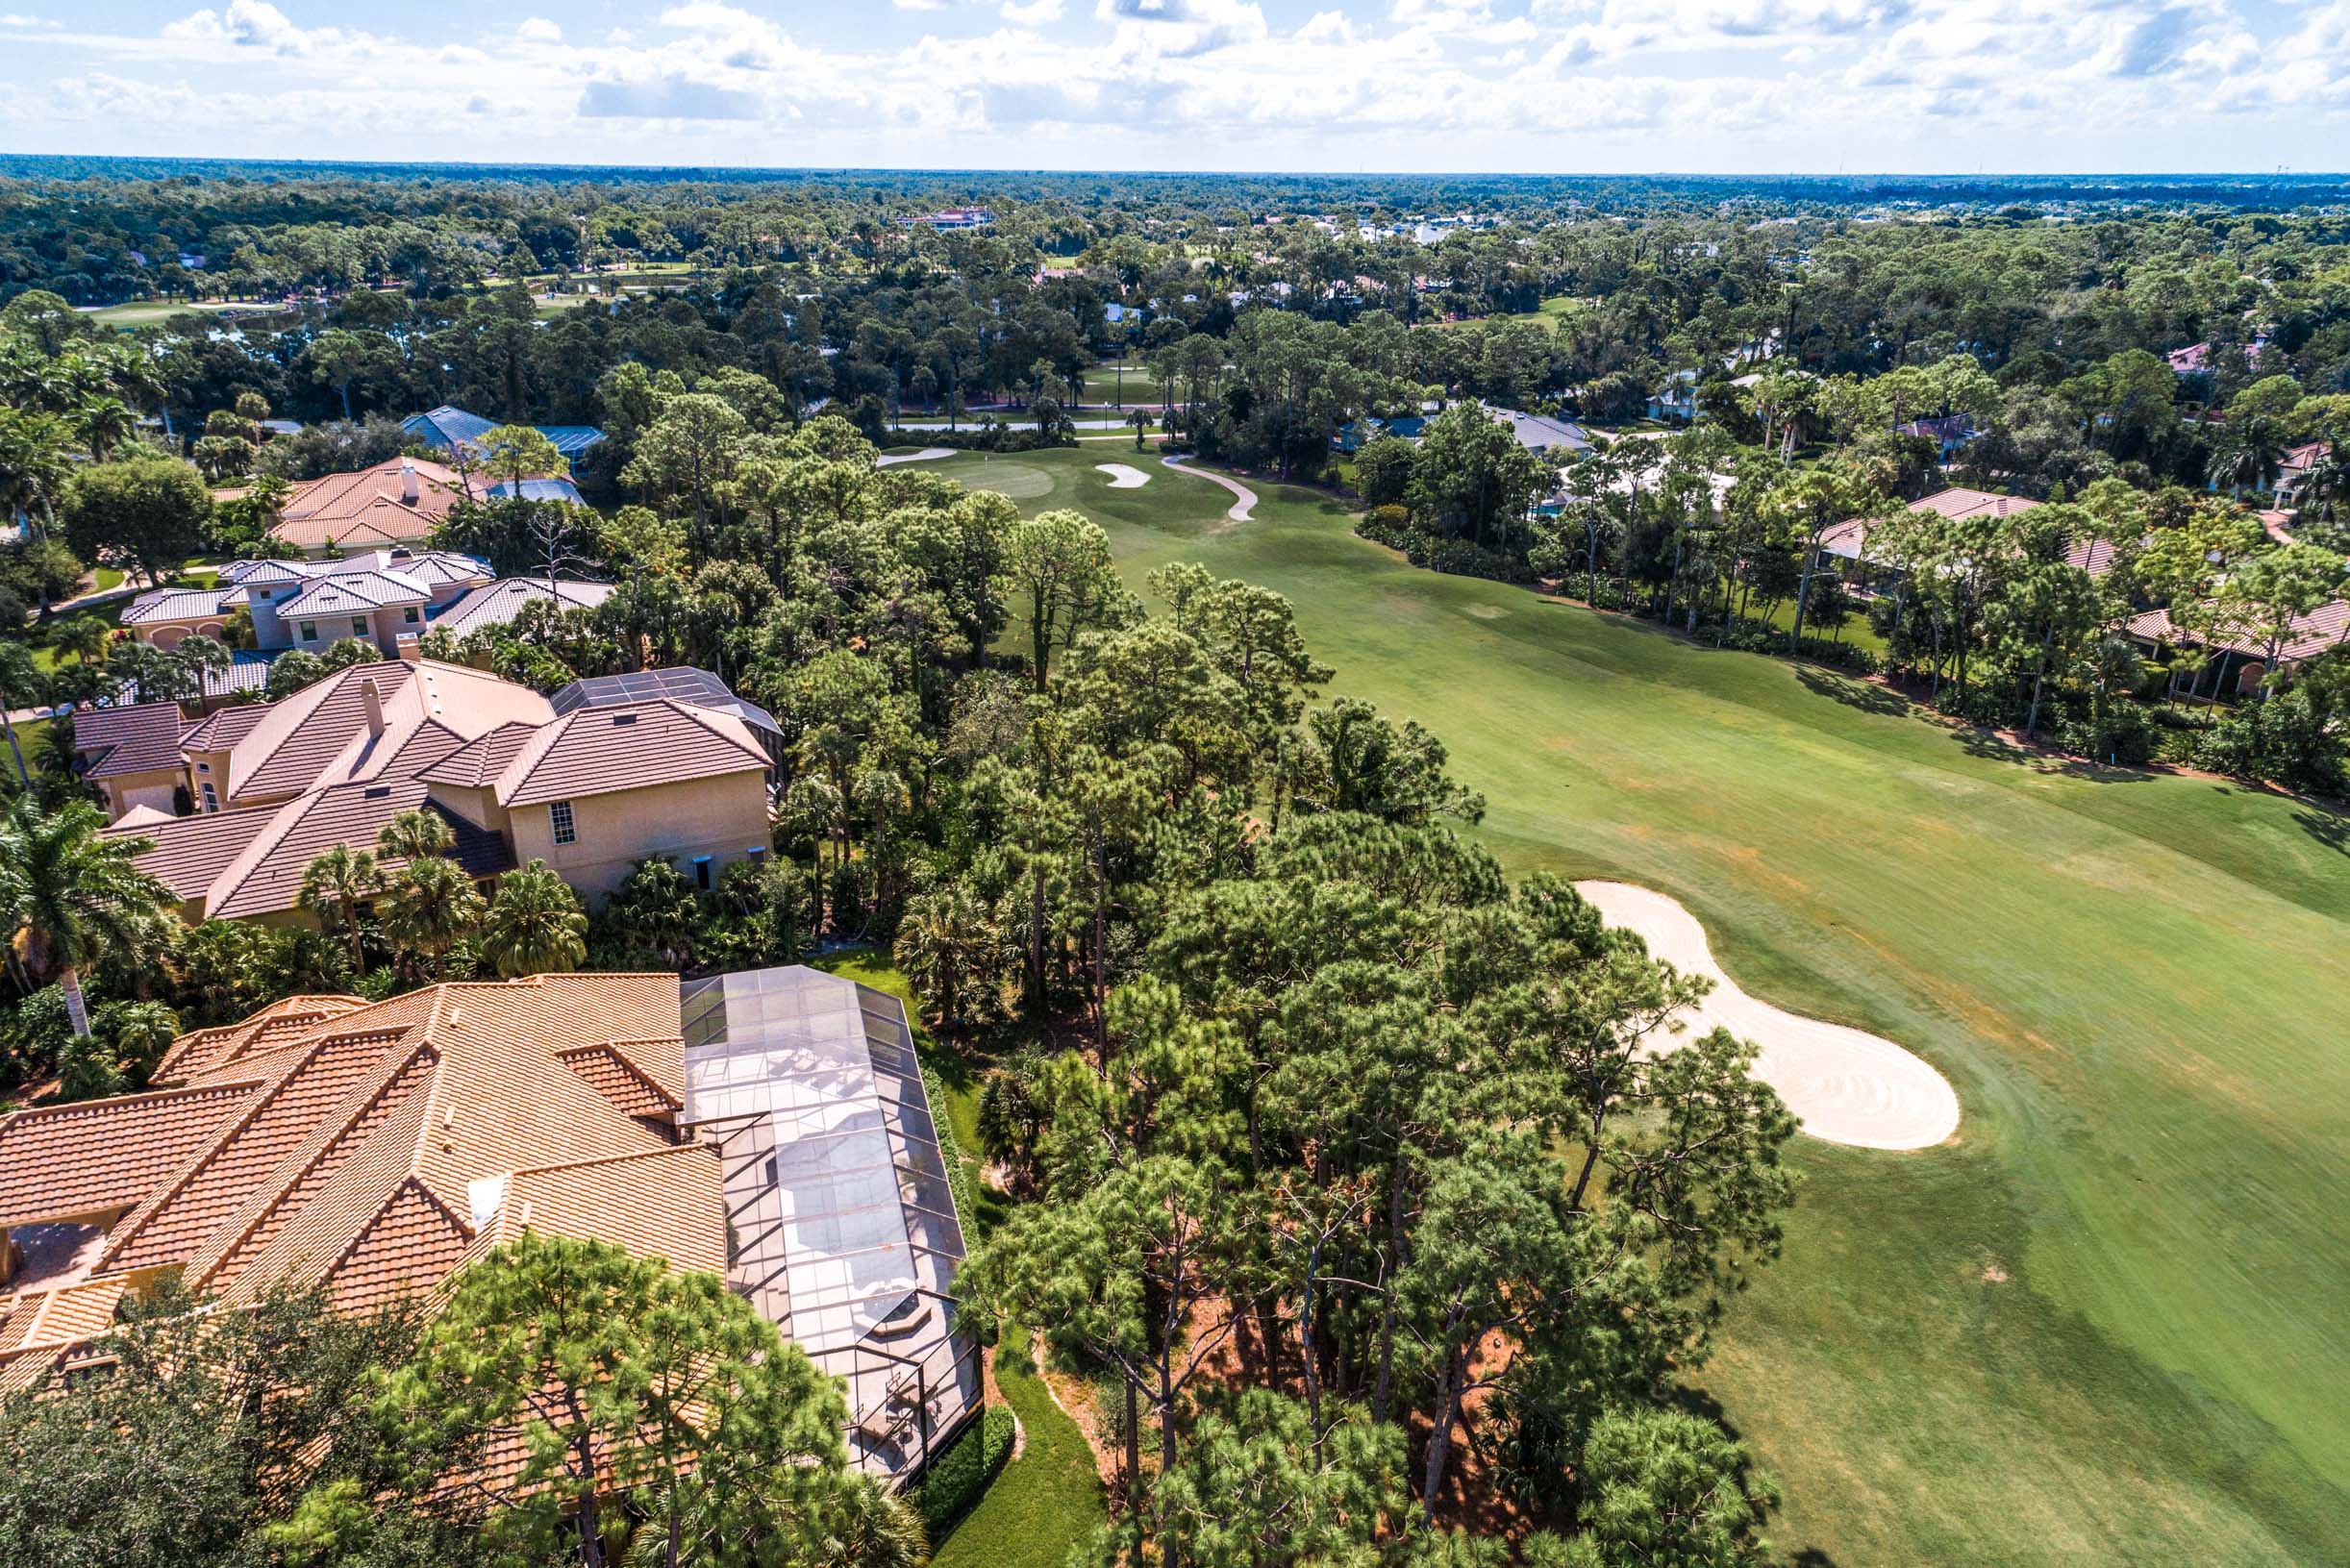 2716 Buckthorn Way - Arial View of Mansion and Golf Course